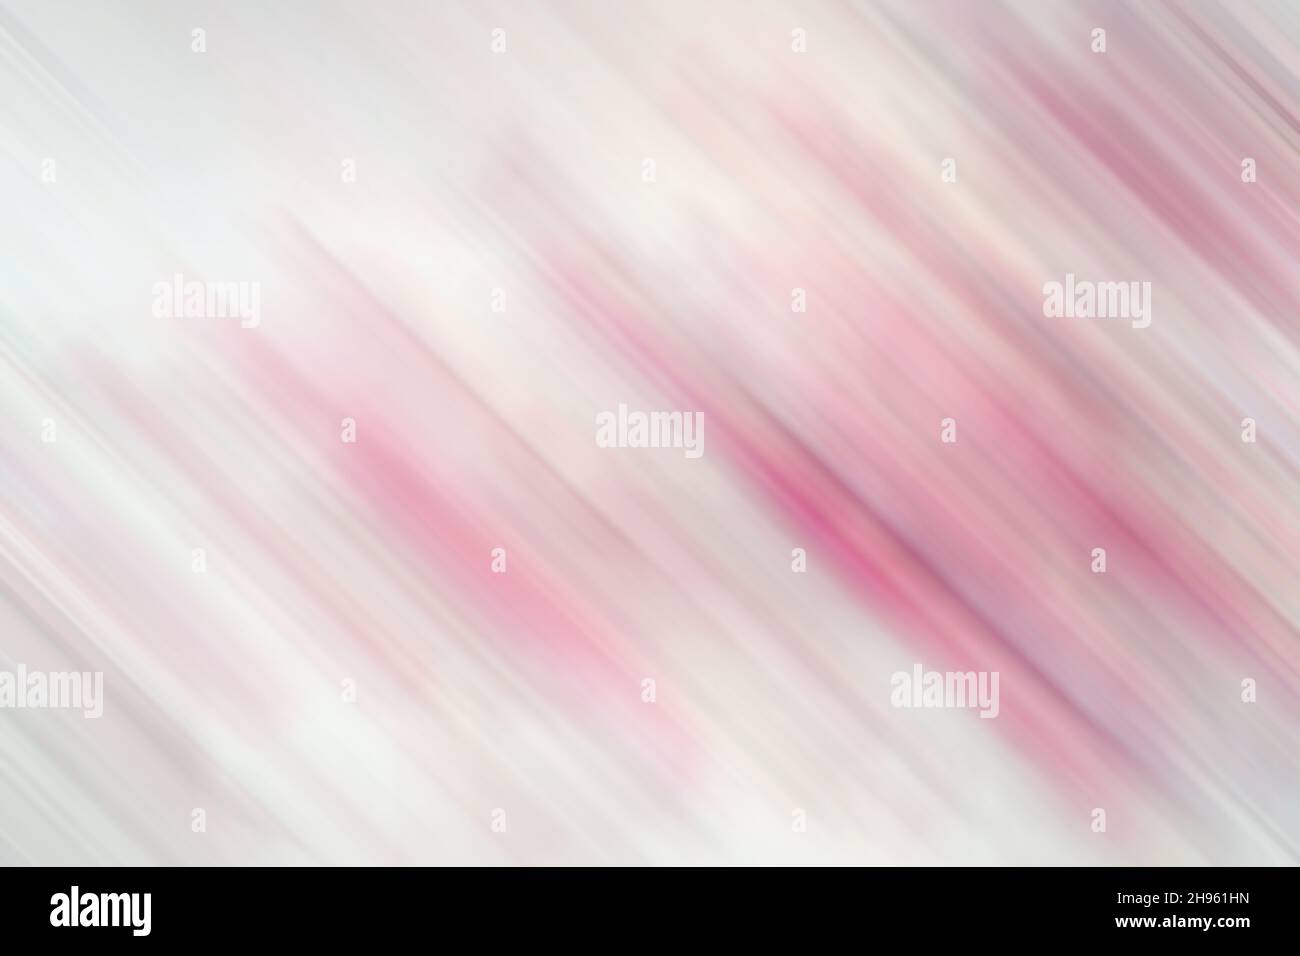 Abstract blurred background, blurred background effect. Stock Photo